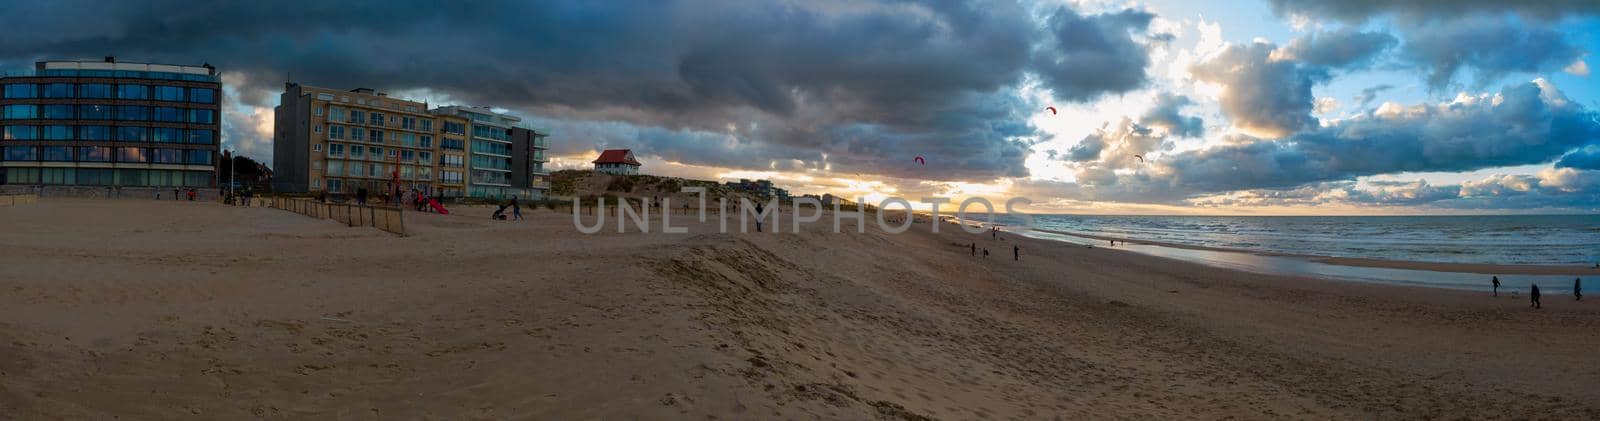 sunset on the beach in Autumn. by Youri